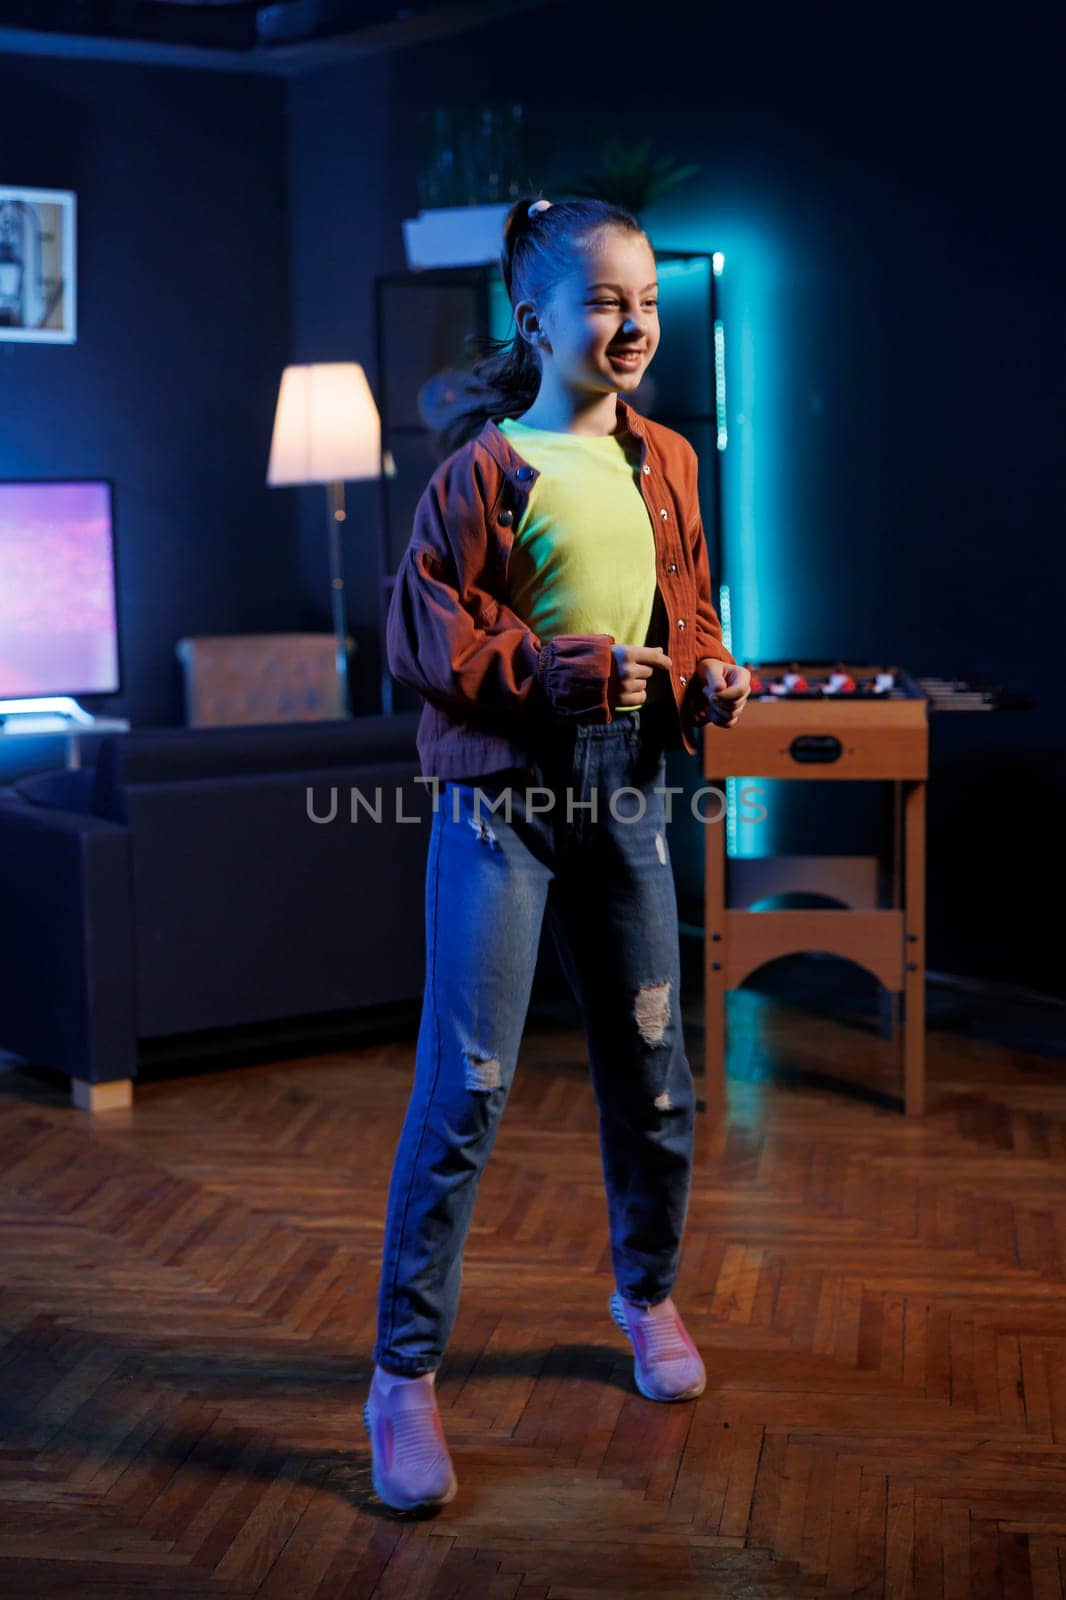 Young girl dancing in dimly lit home studio interior, producing content for online channel by DCStudio